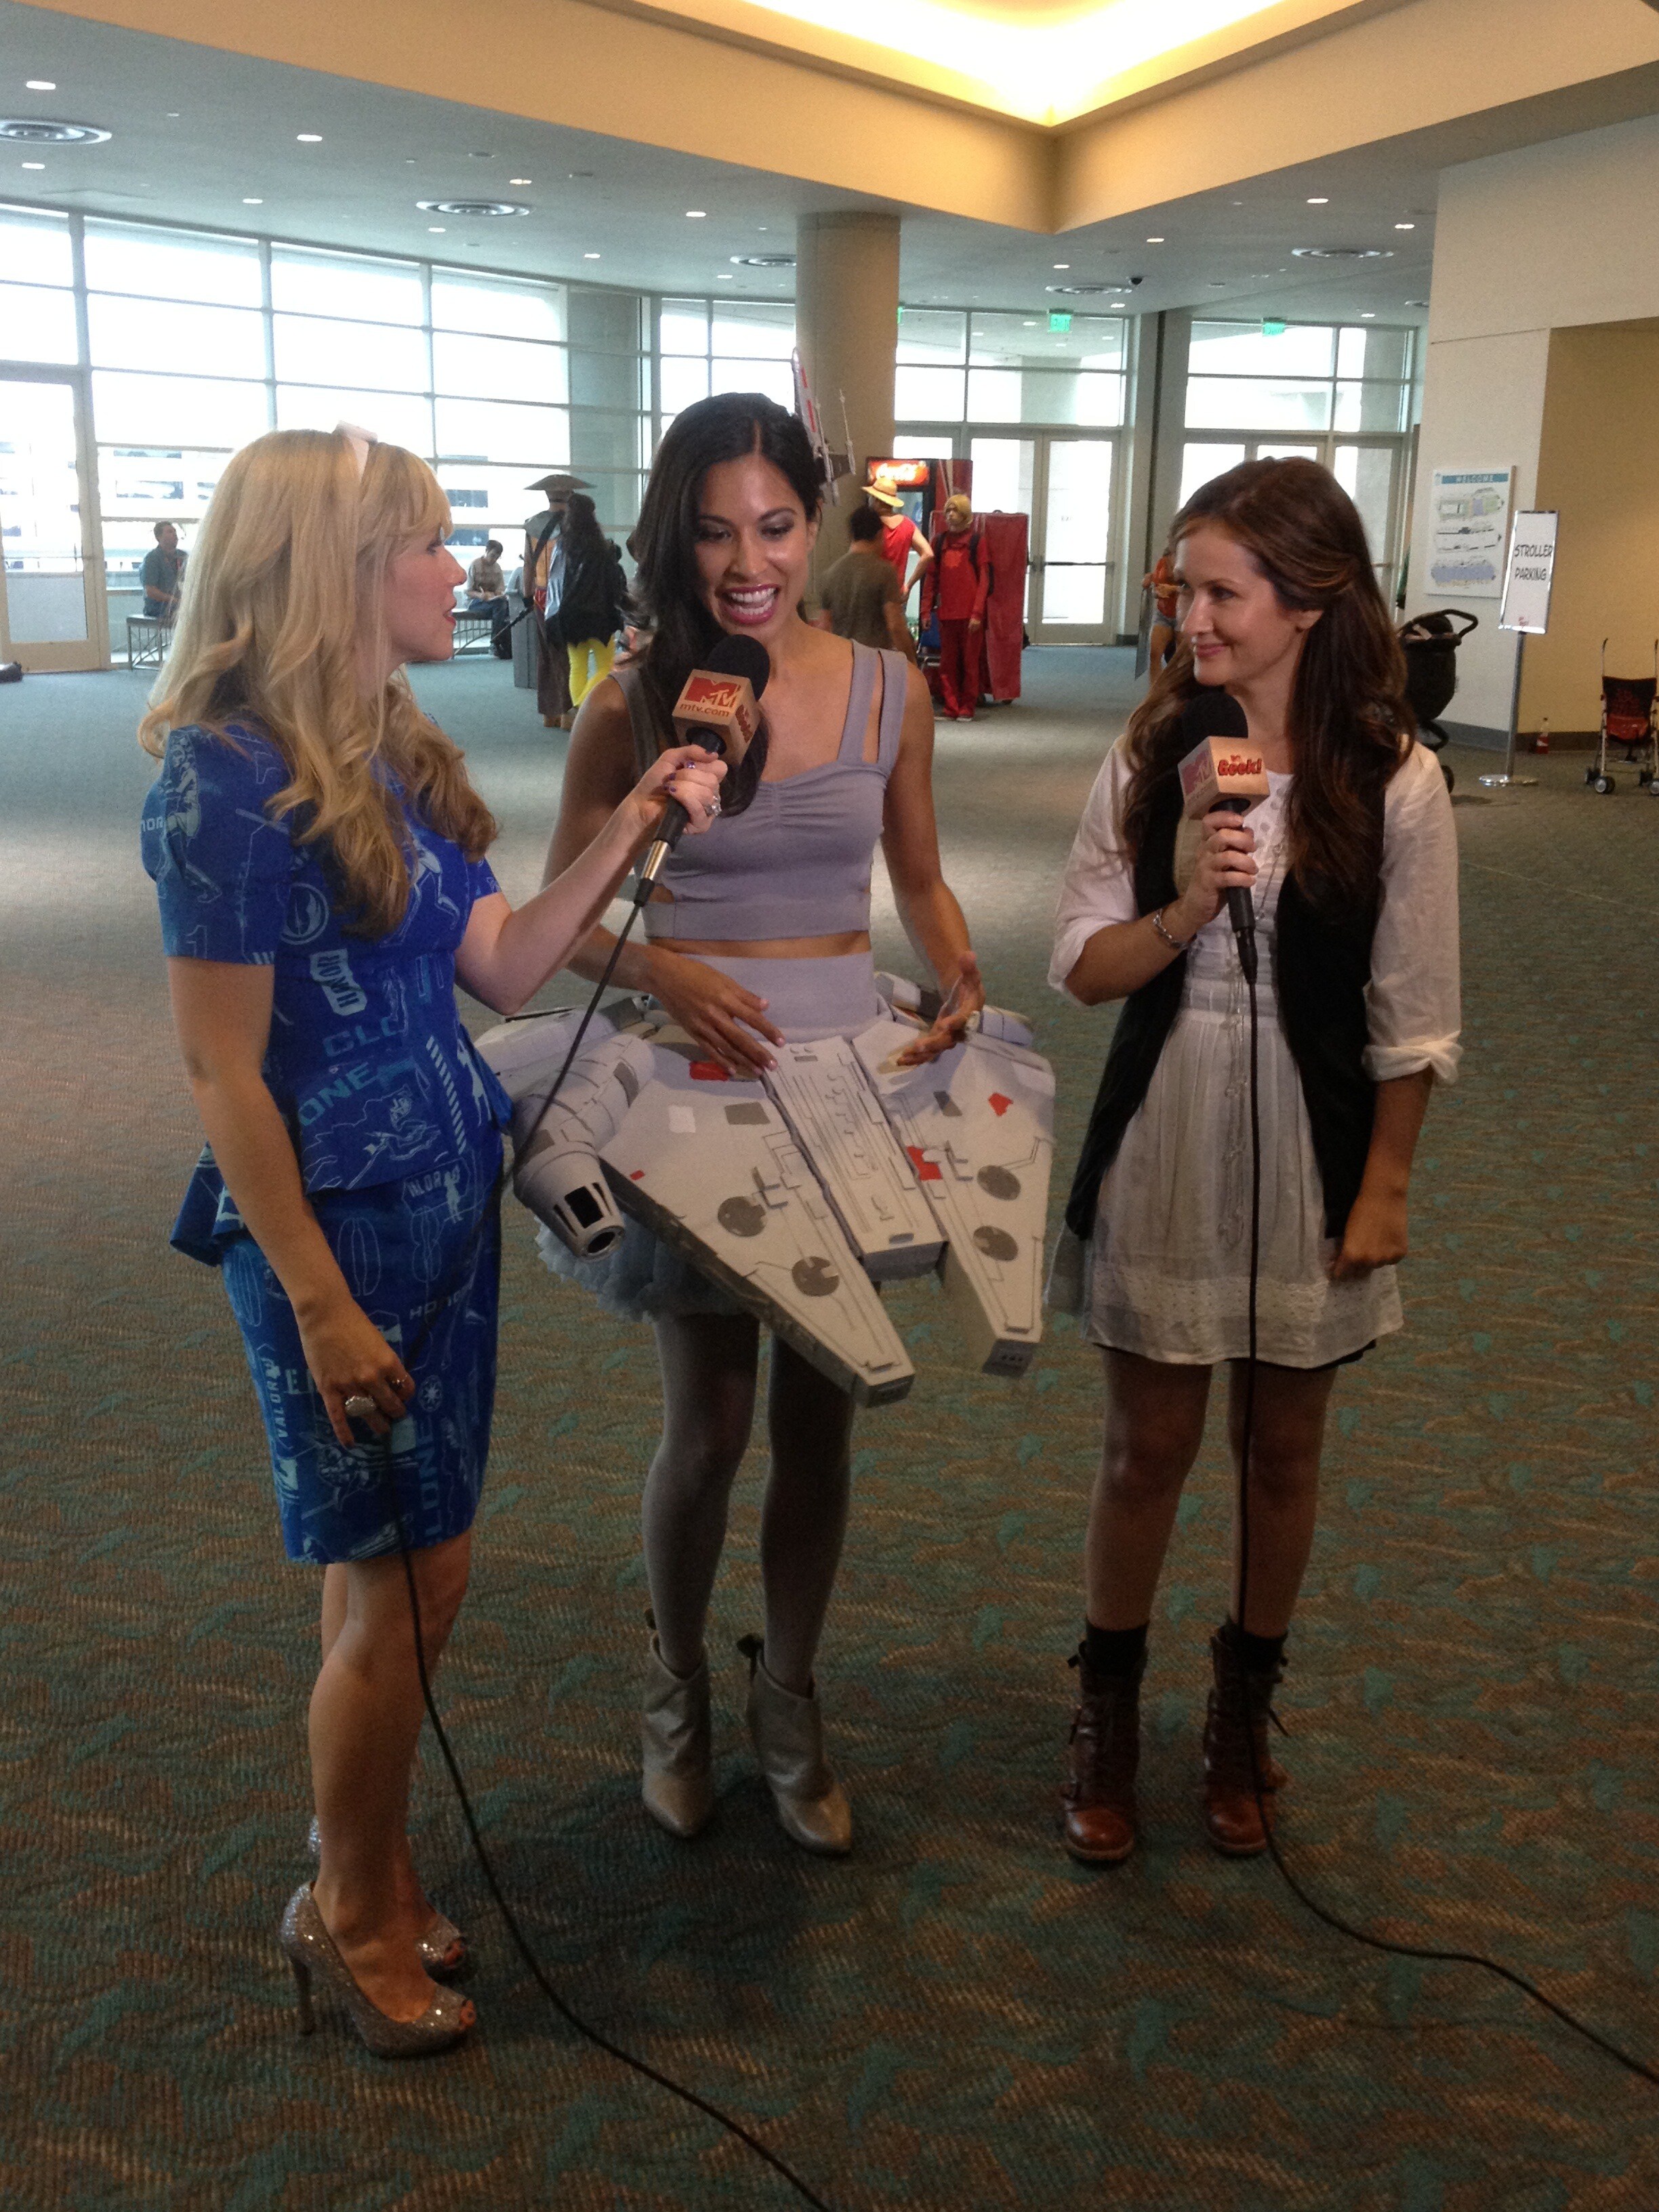 Me and Cat interview our winner, Jennifer, in her Millennium Falcon dress for MTV Geek!